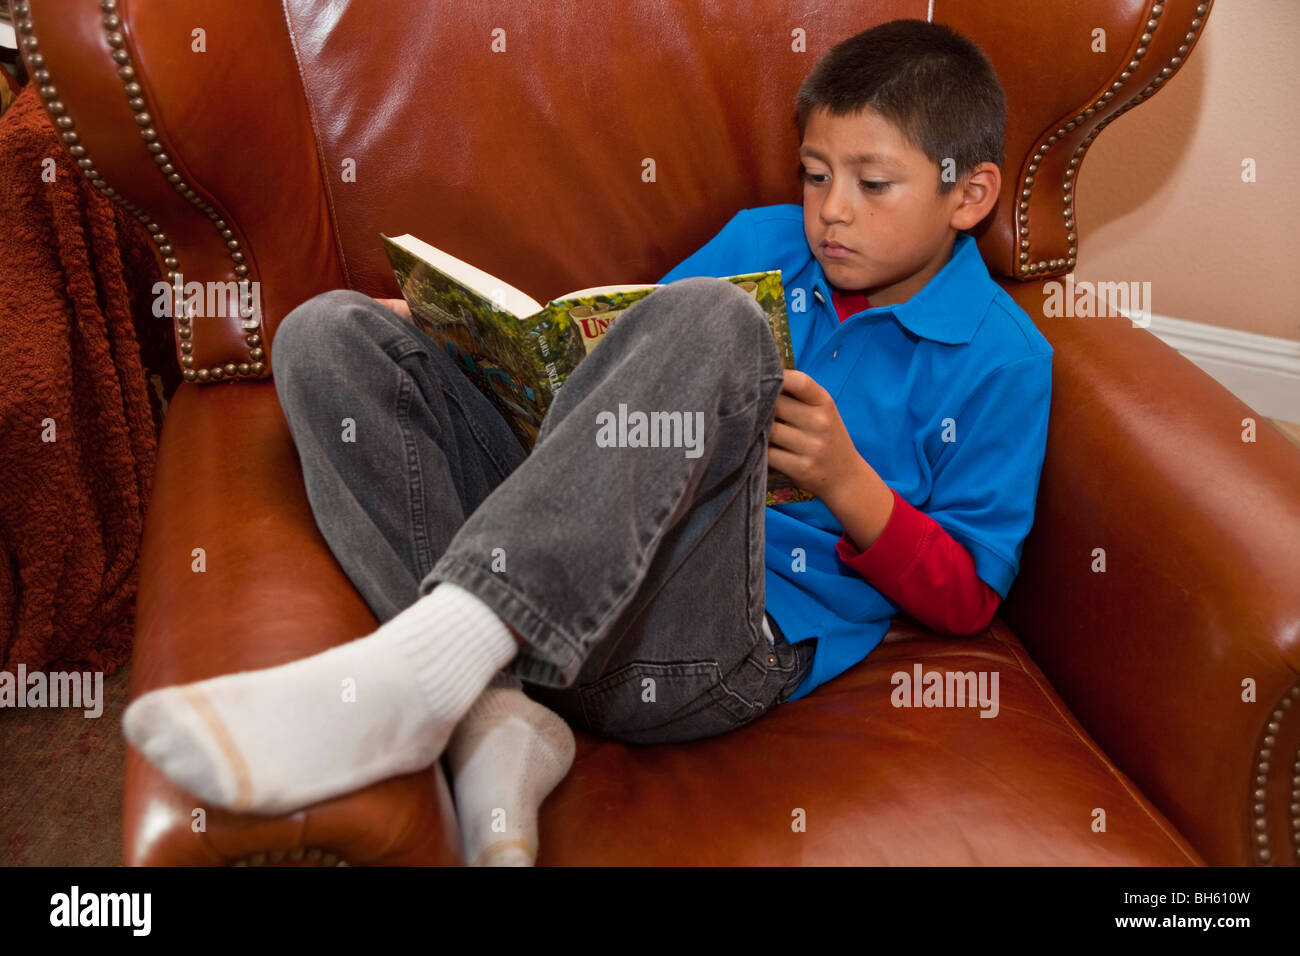 multi racial diversity racially diverse multicultural cultural 8 year old boy reading book relax relaxing relaxes relaxed cuddled up rainy day activity Stock Photo